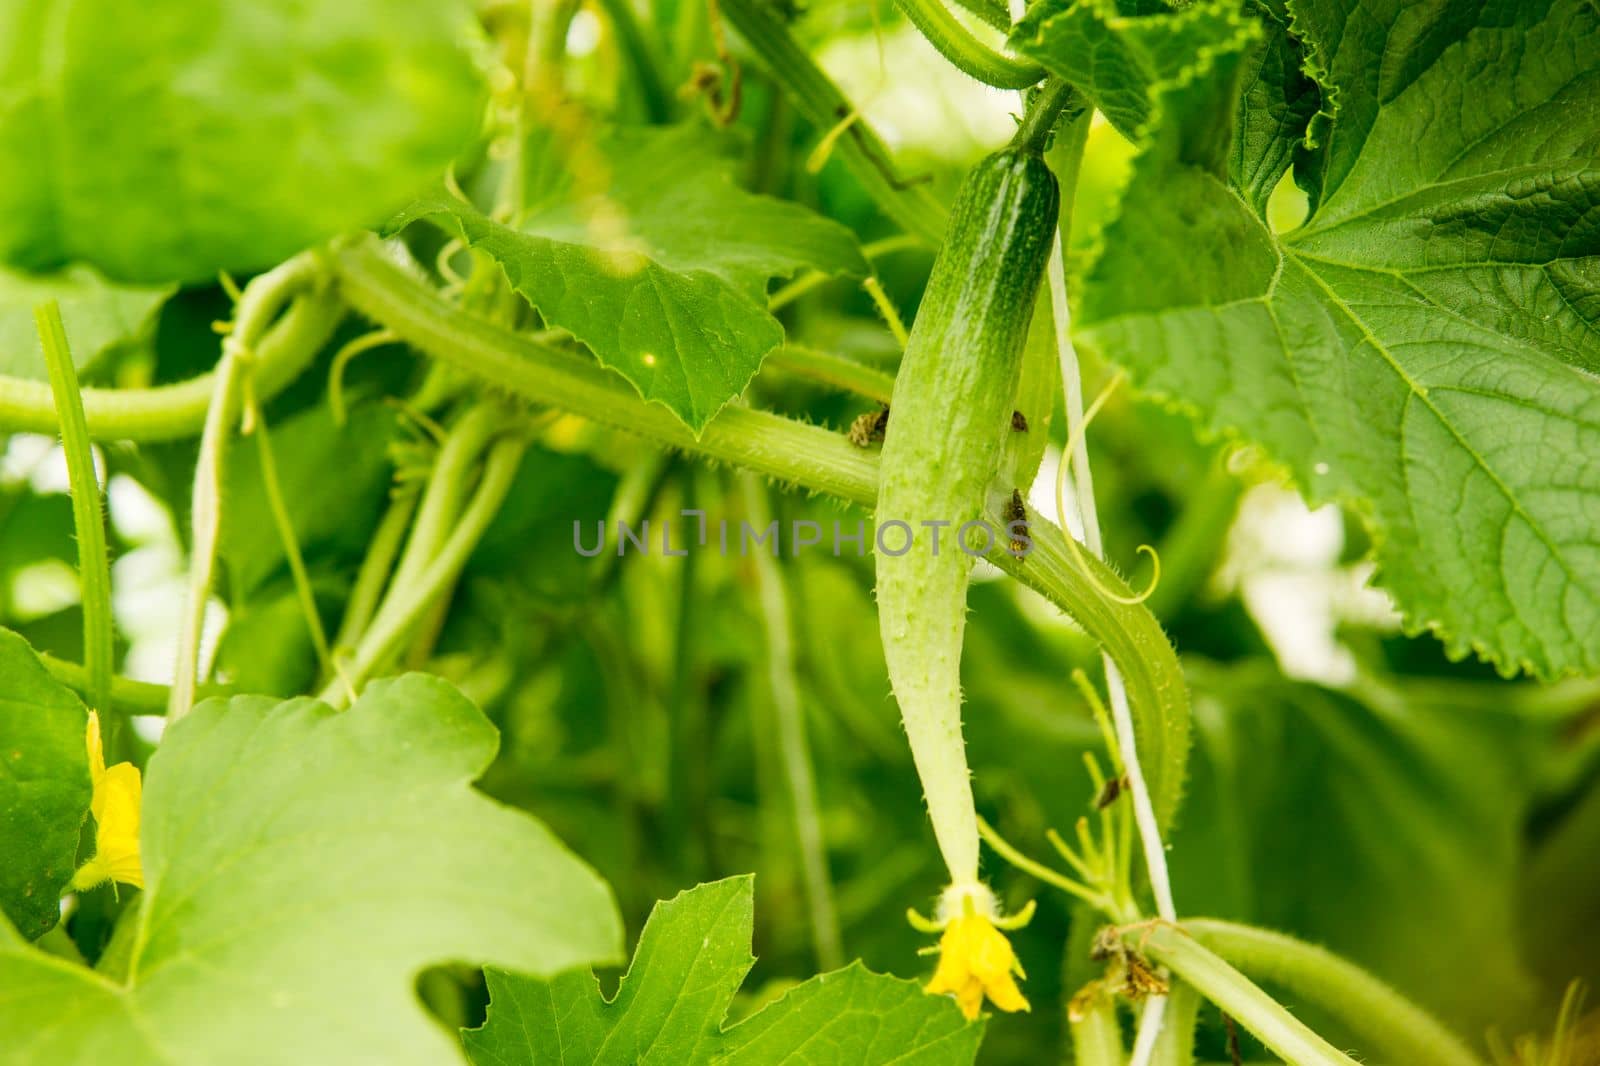 Cucumbers hang on a branch in the greenhouse. The concept of gardening and life in the country. by Annu1tochka